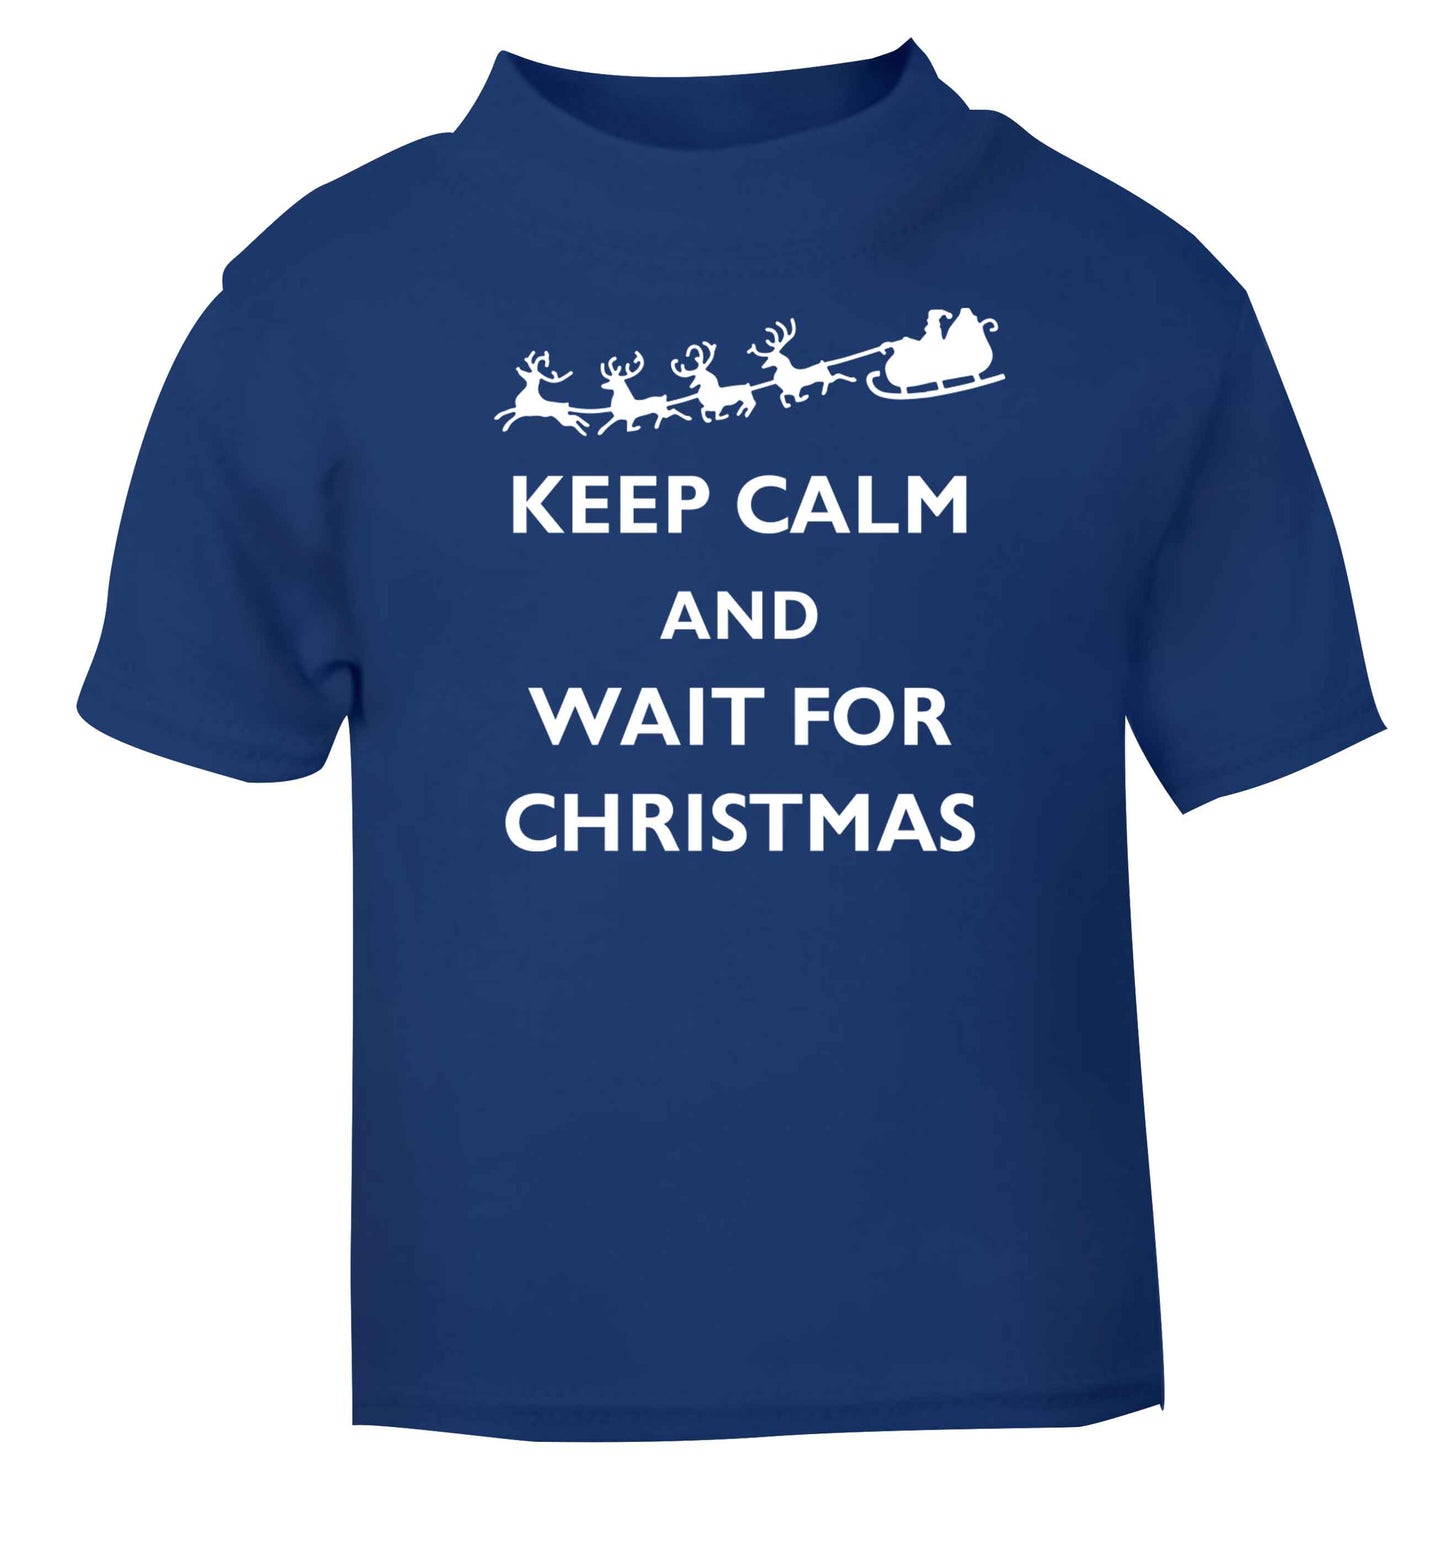 Keep calm and wait for Christmas blue baby toddler Tshirt 2 Years